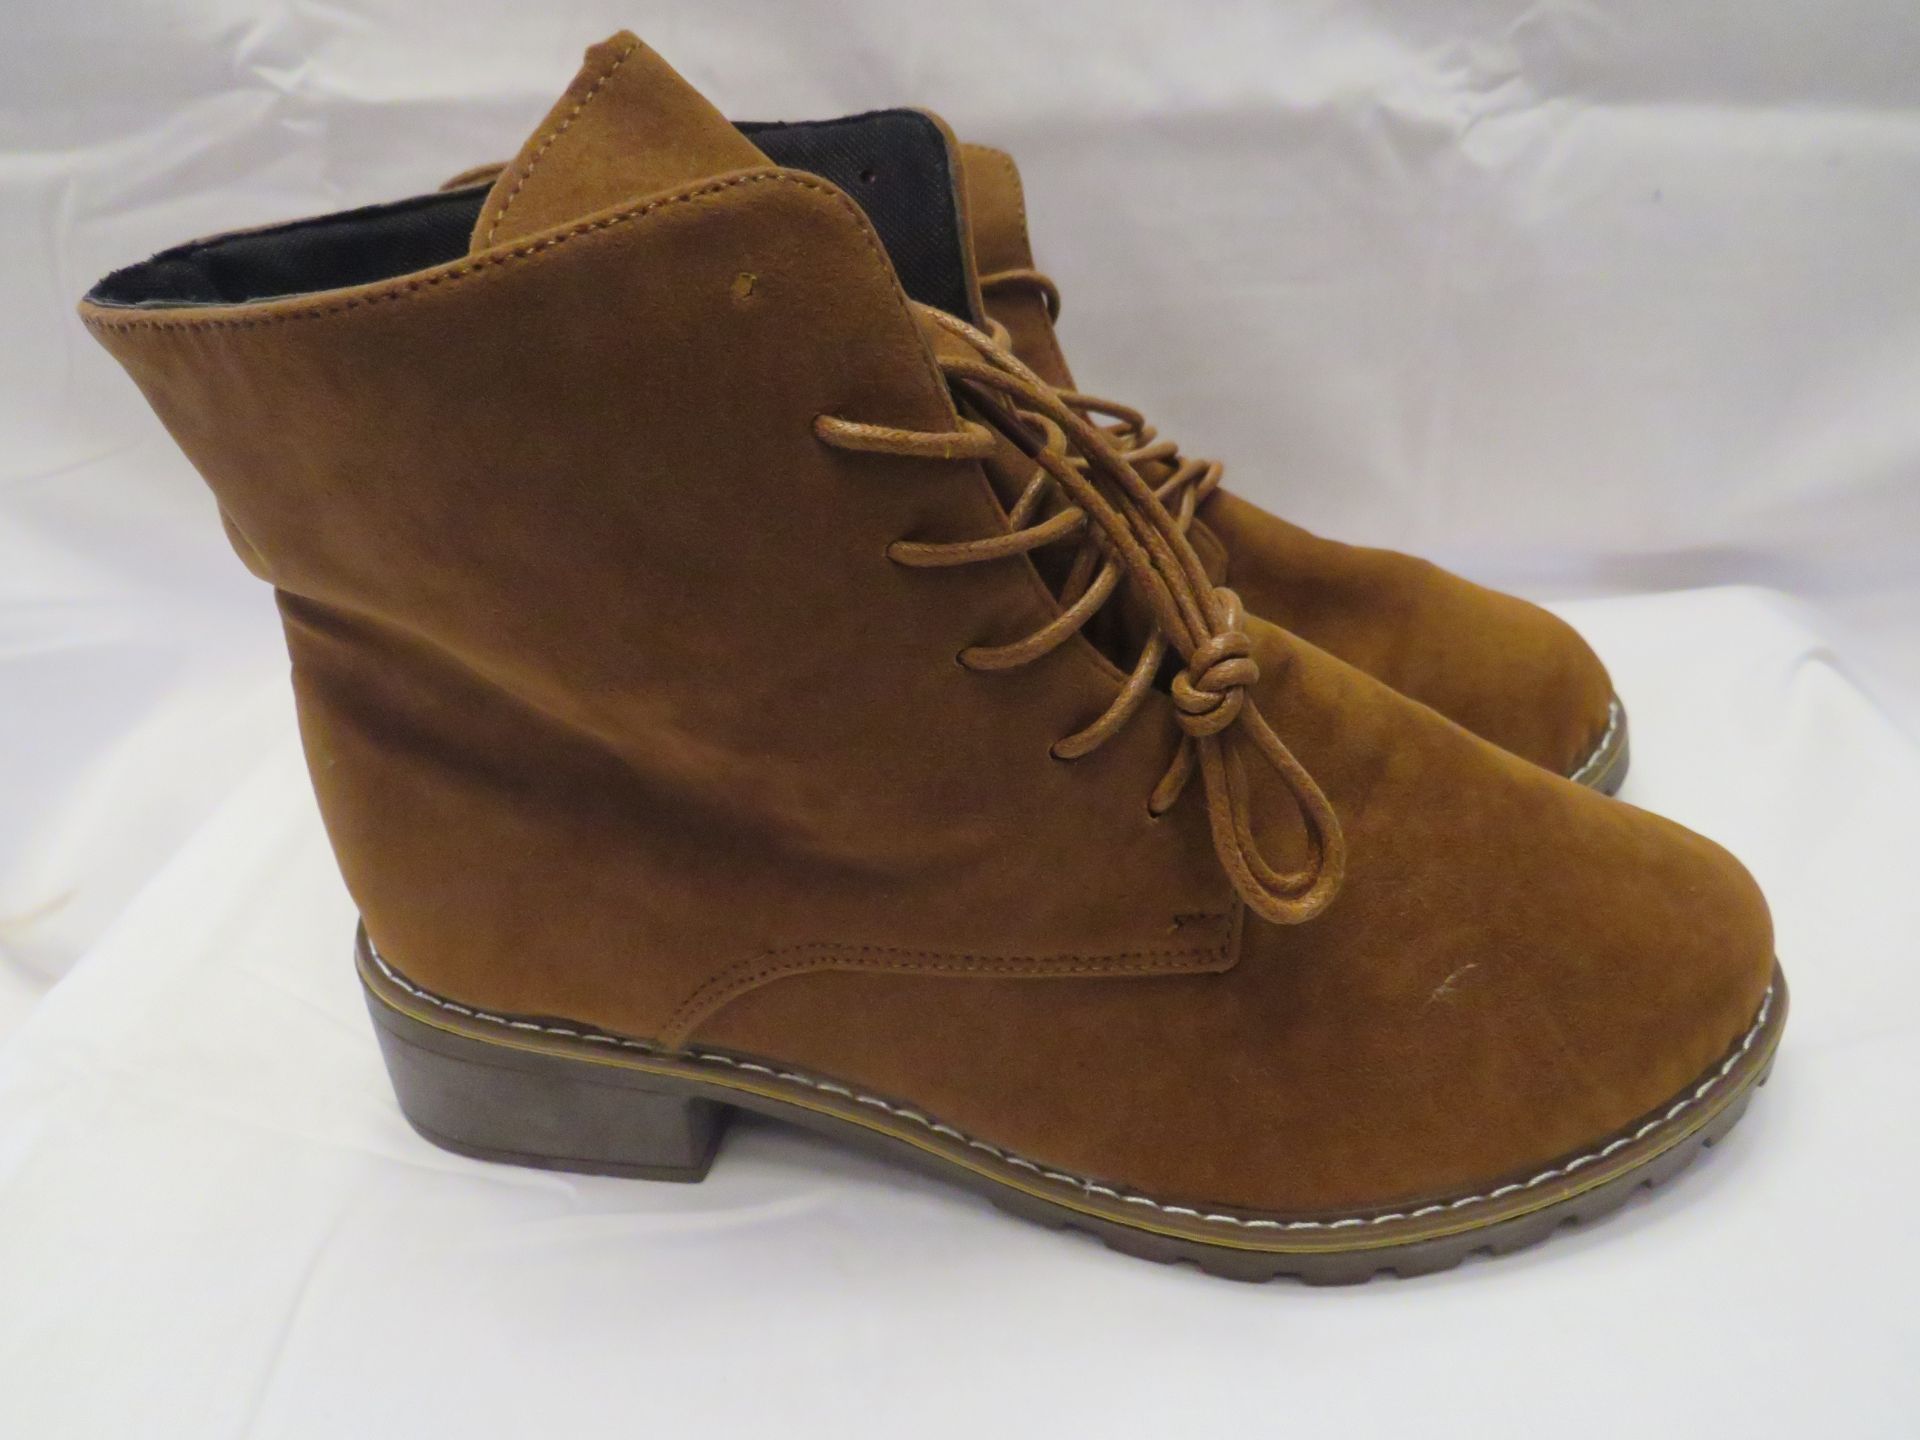 Ladies Flat Suede Ankle Boot Tan Size 37 New